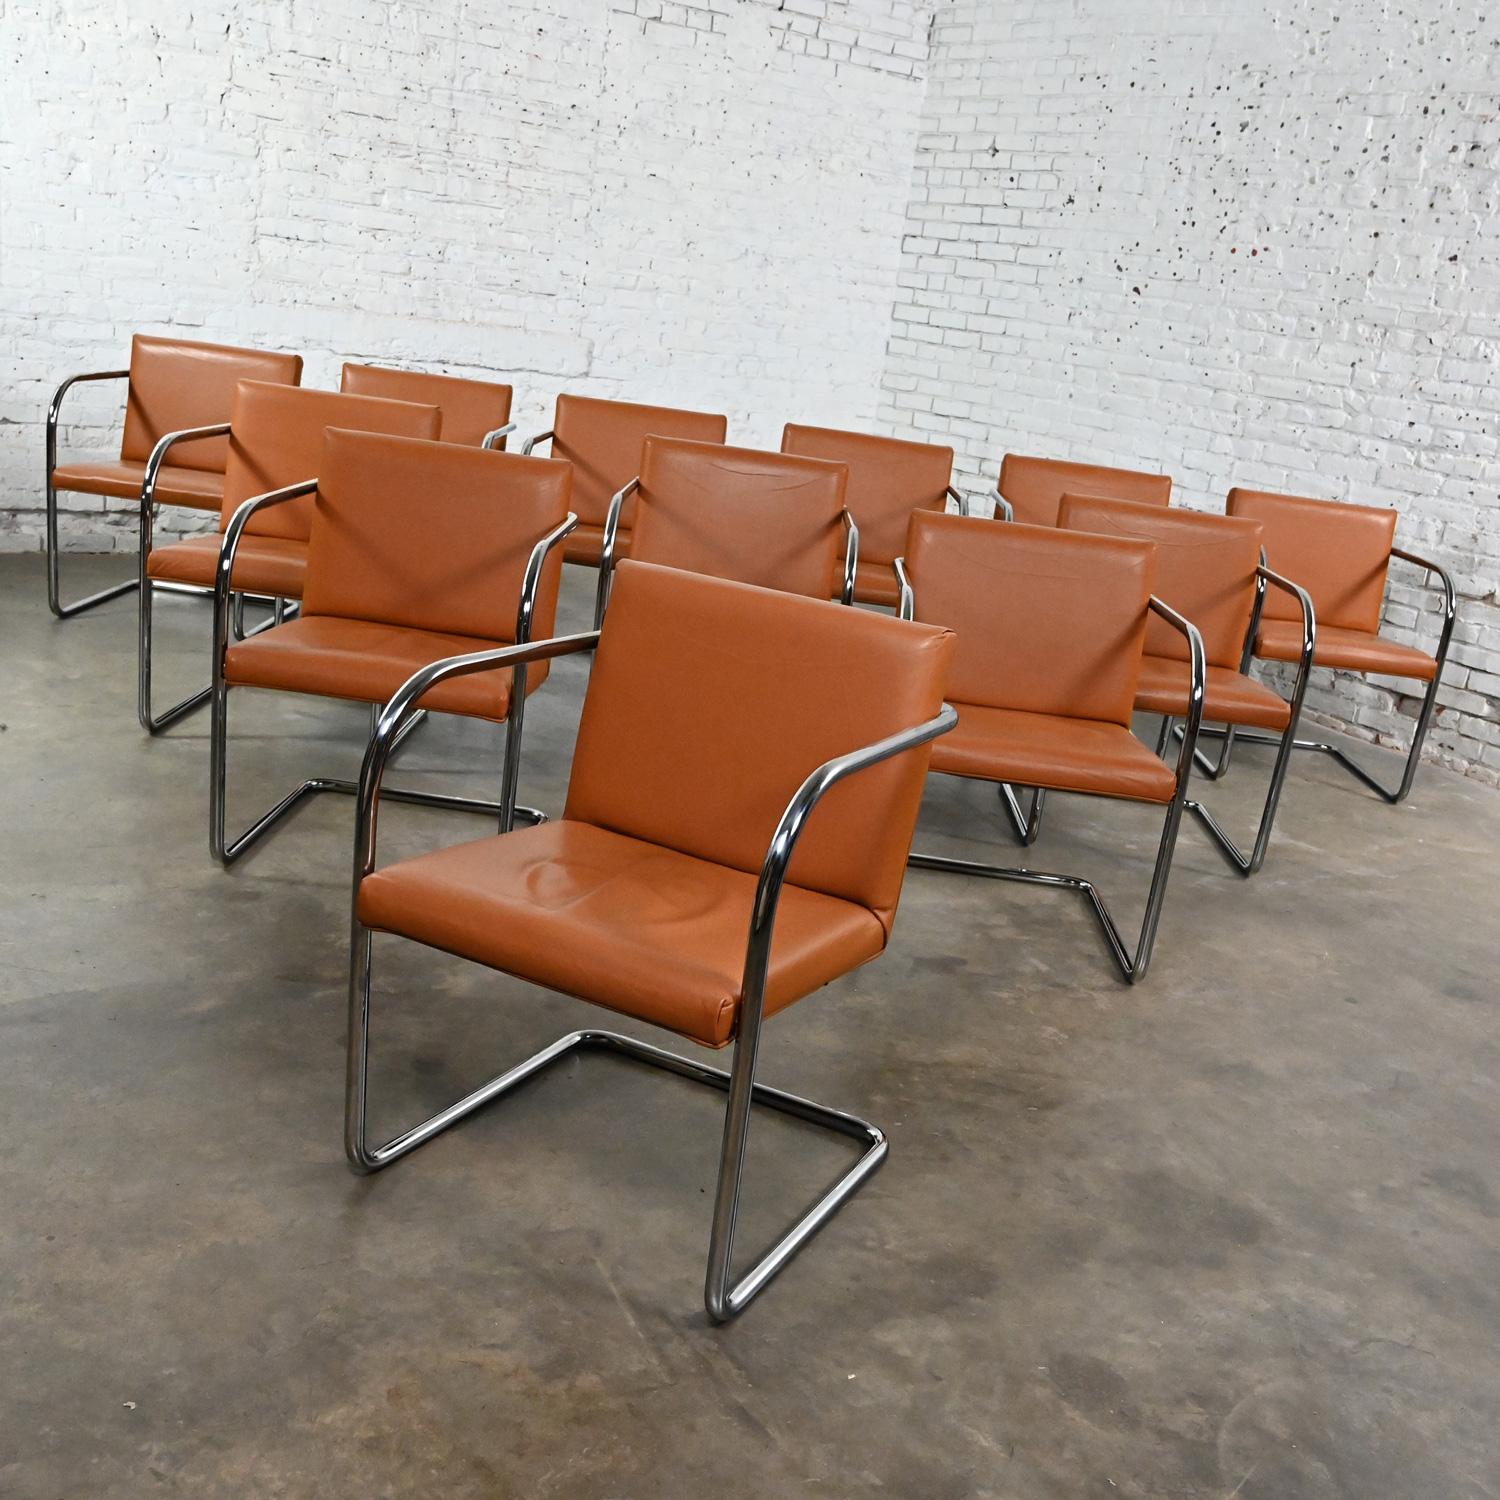 Thonet Bauhaus Brno Style Chairs Chrome & Cognac Leather Cantilever Set of 12  For Sale 4